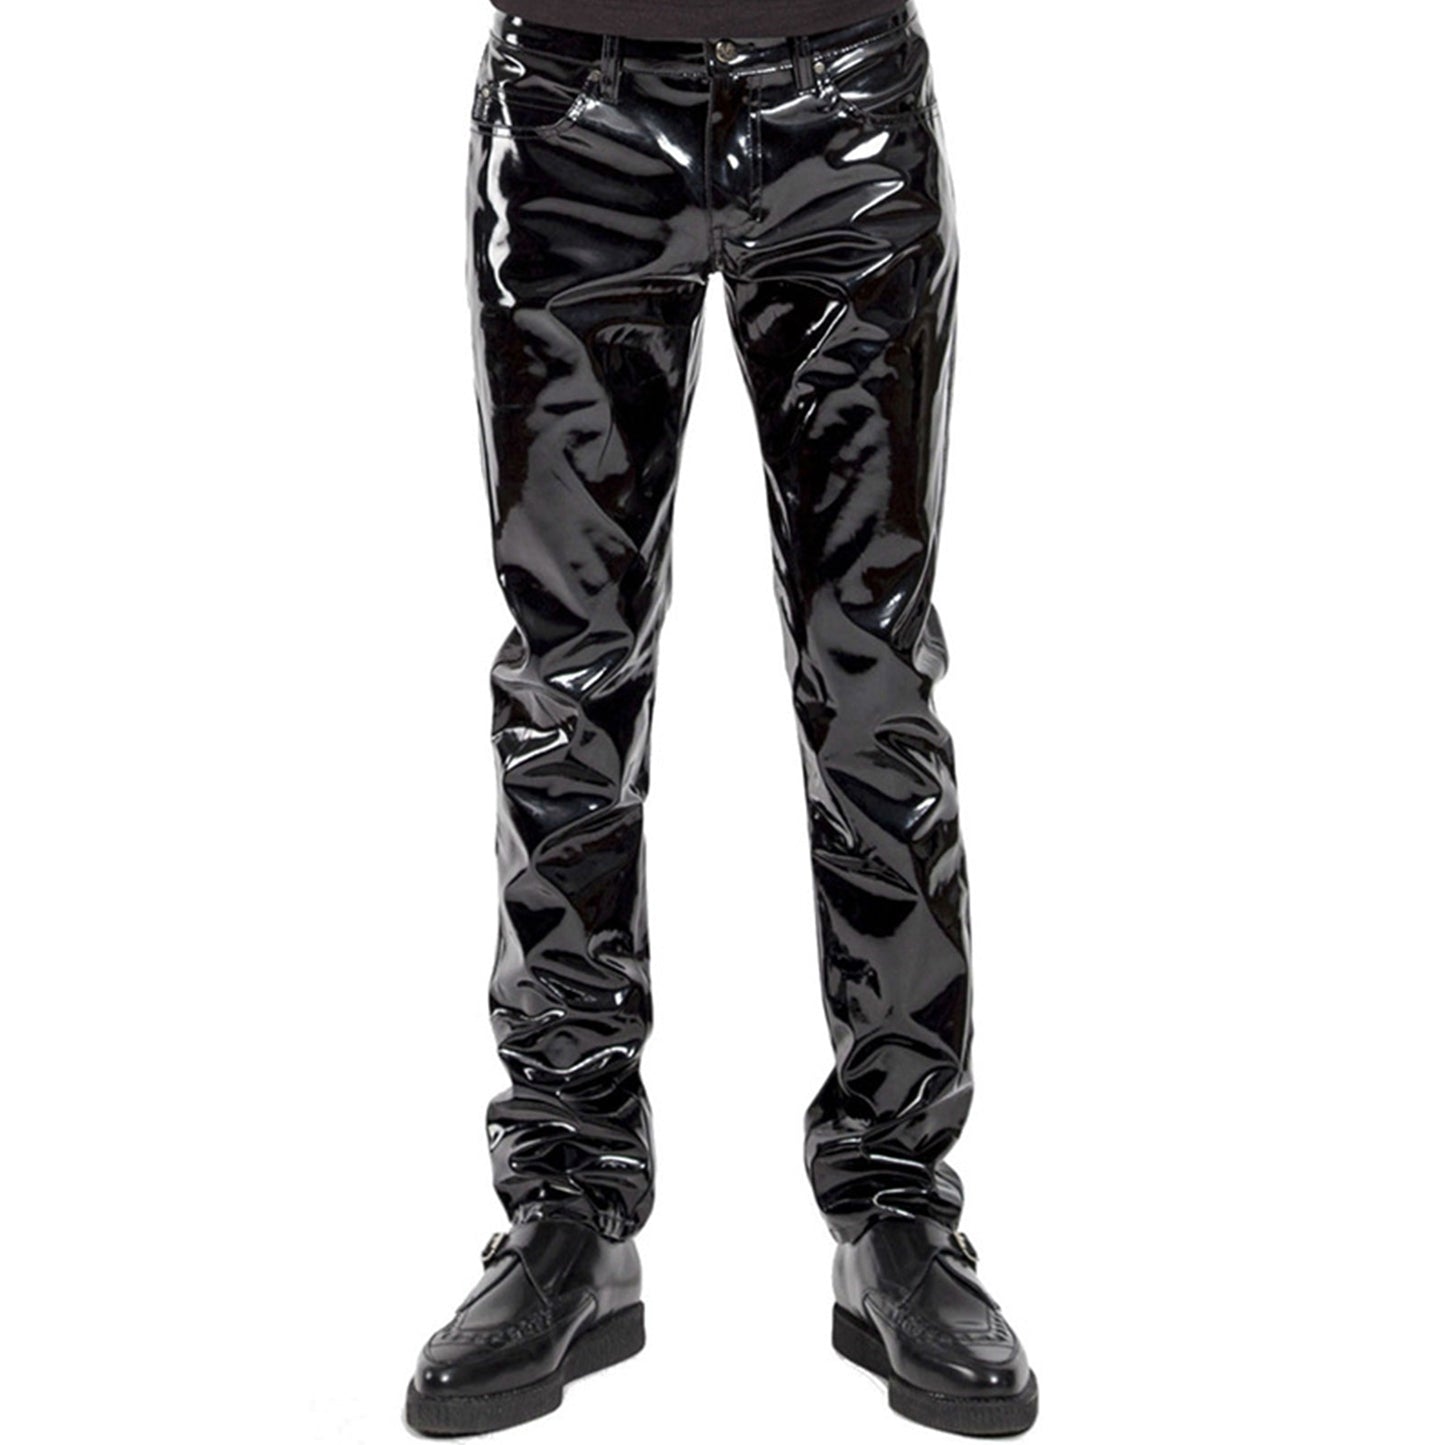 Dark and Edgy Faux Leather PVC Pants for a Gothic Vibe